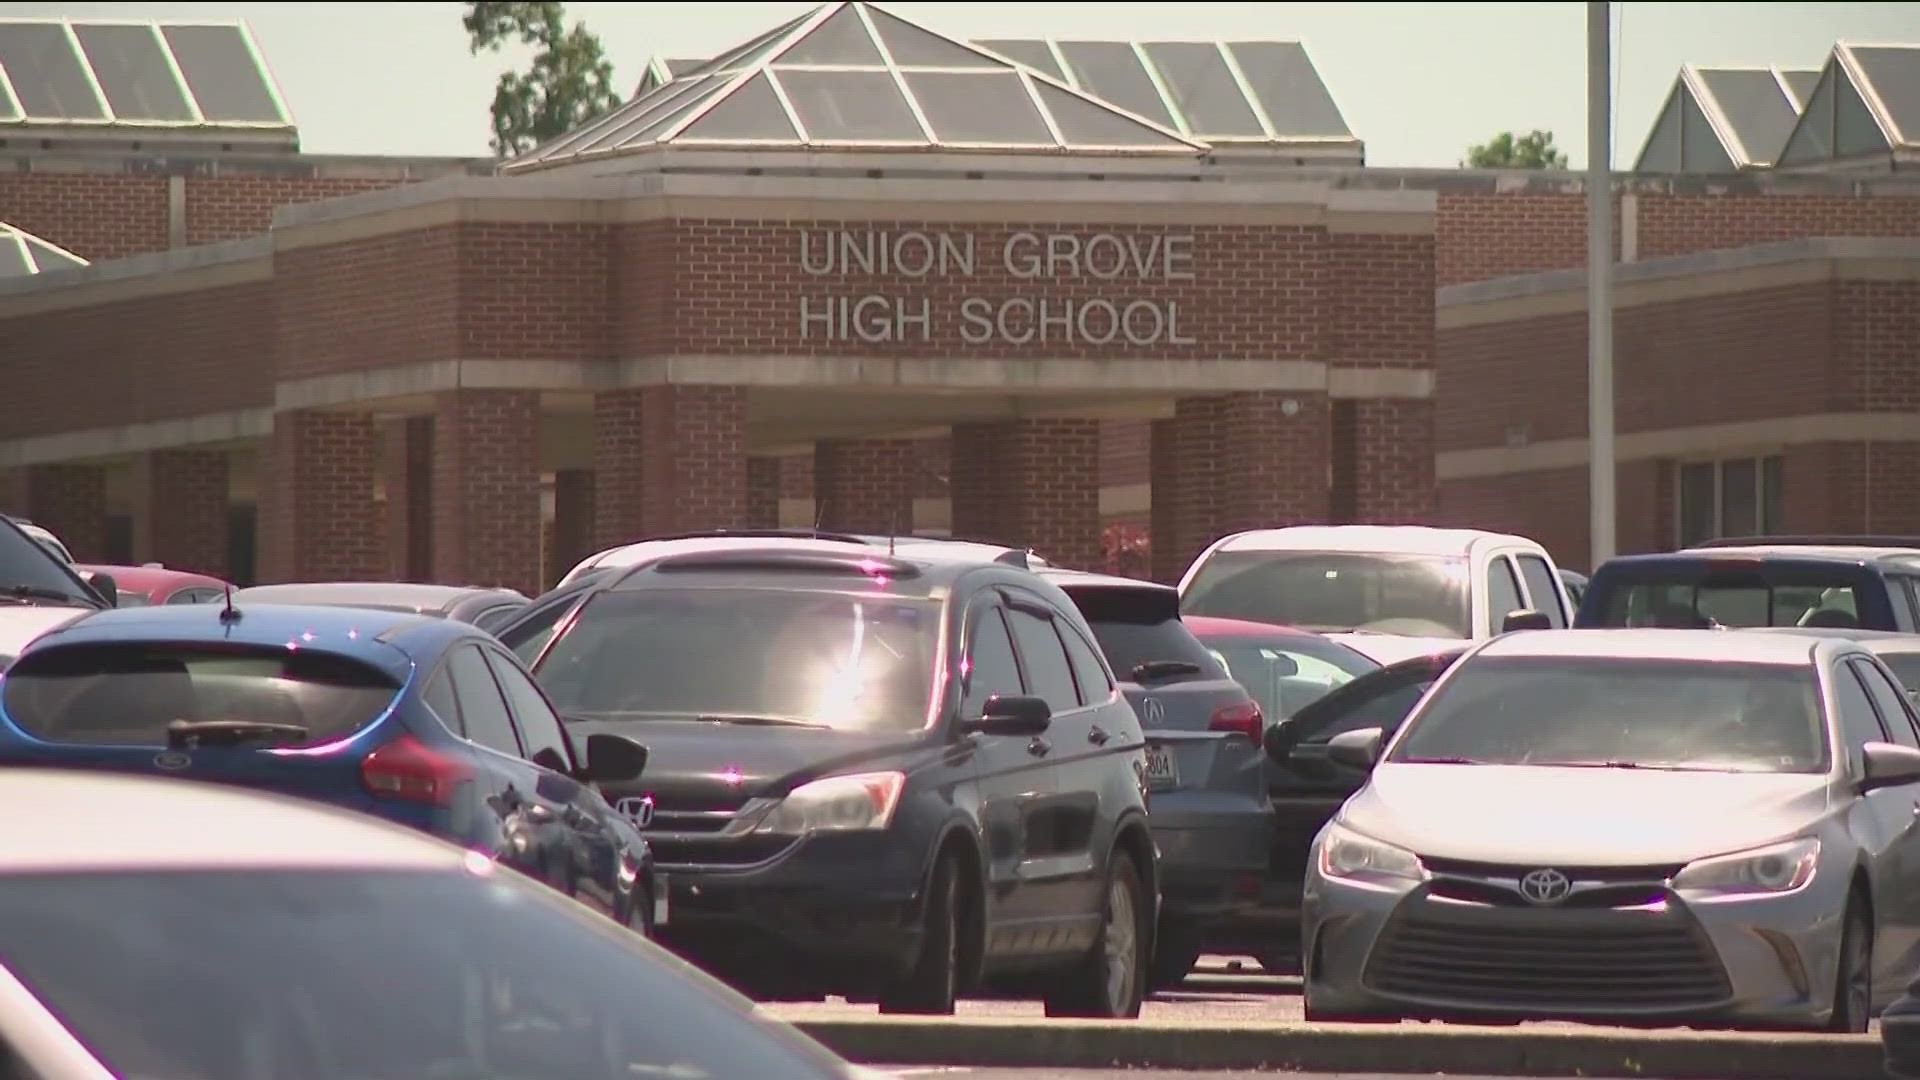 A meeting will be held Thursday night to address school violence.